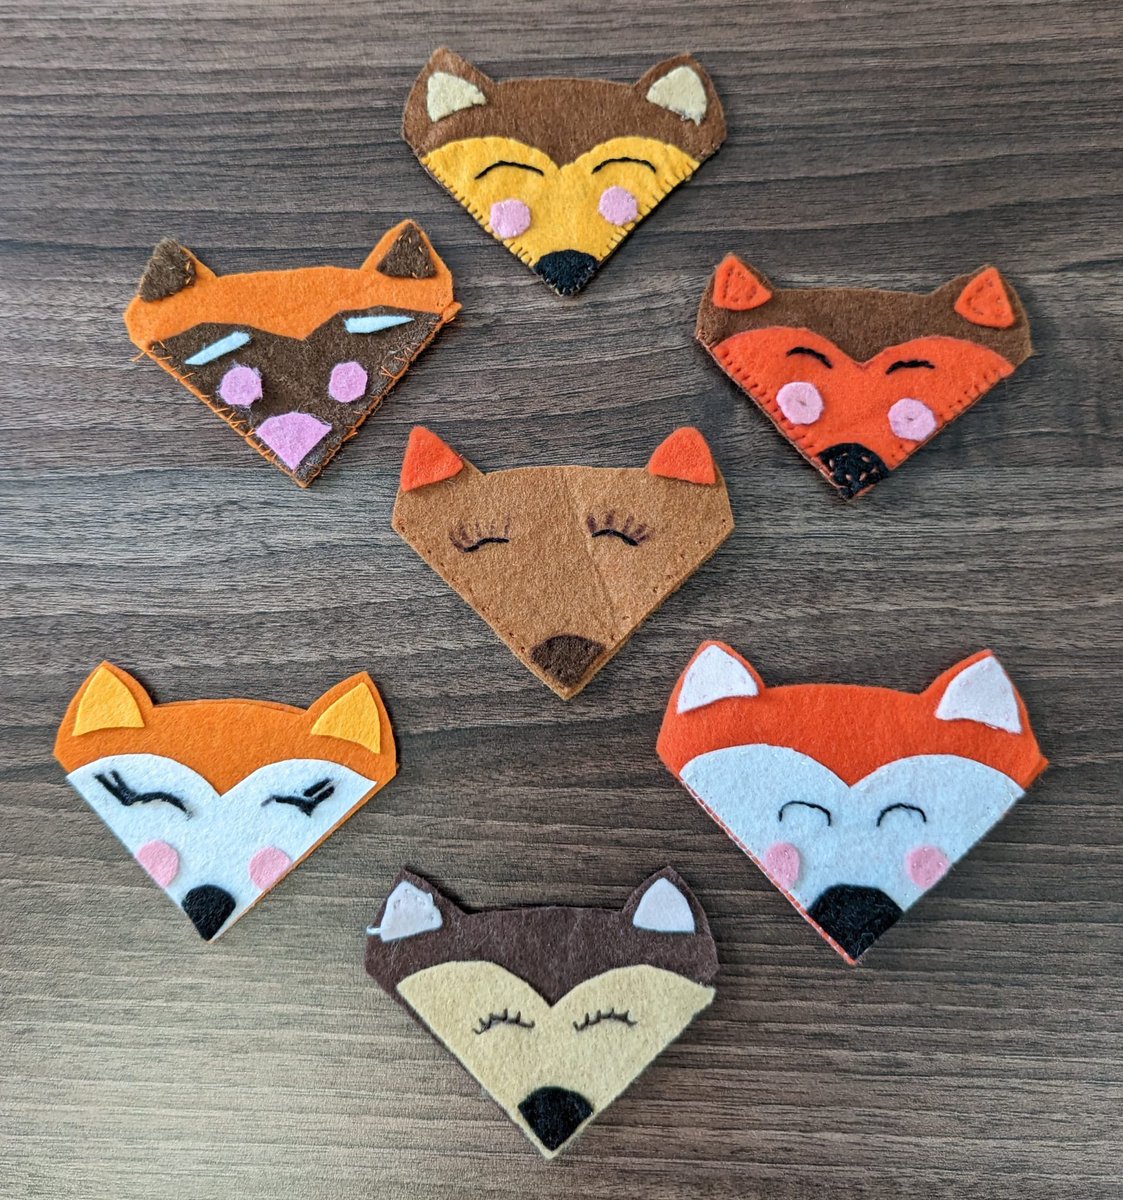 Beautiful felt fox corner bookmarks created in our adult crafting class at Clydebank library today. If you’d like to give it a try, join us on Mon 29th April at 10am in Alexandria library. No skill or experience needed! Sessions are free, book at eventbrite.co.uk/o/learning-dev…